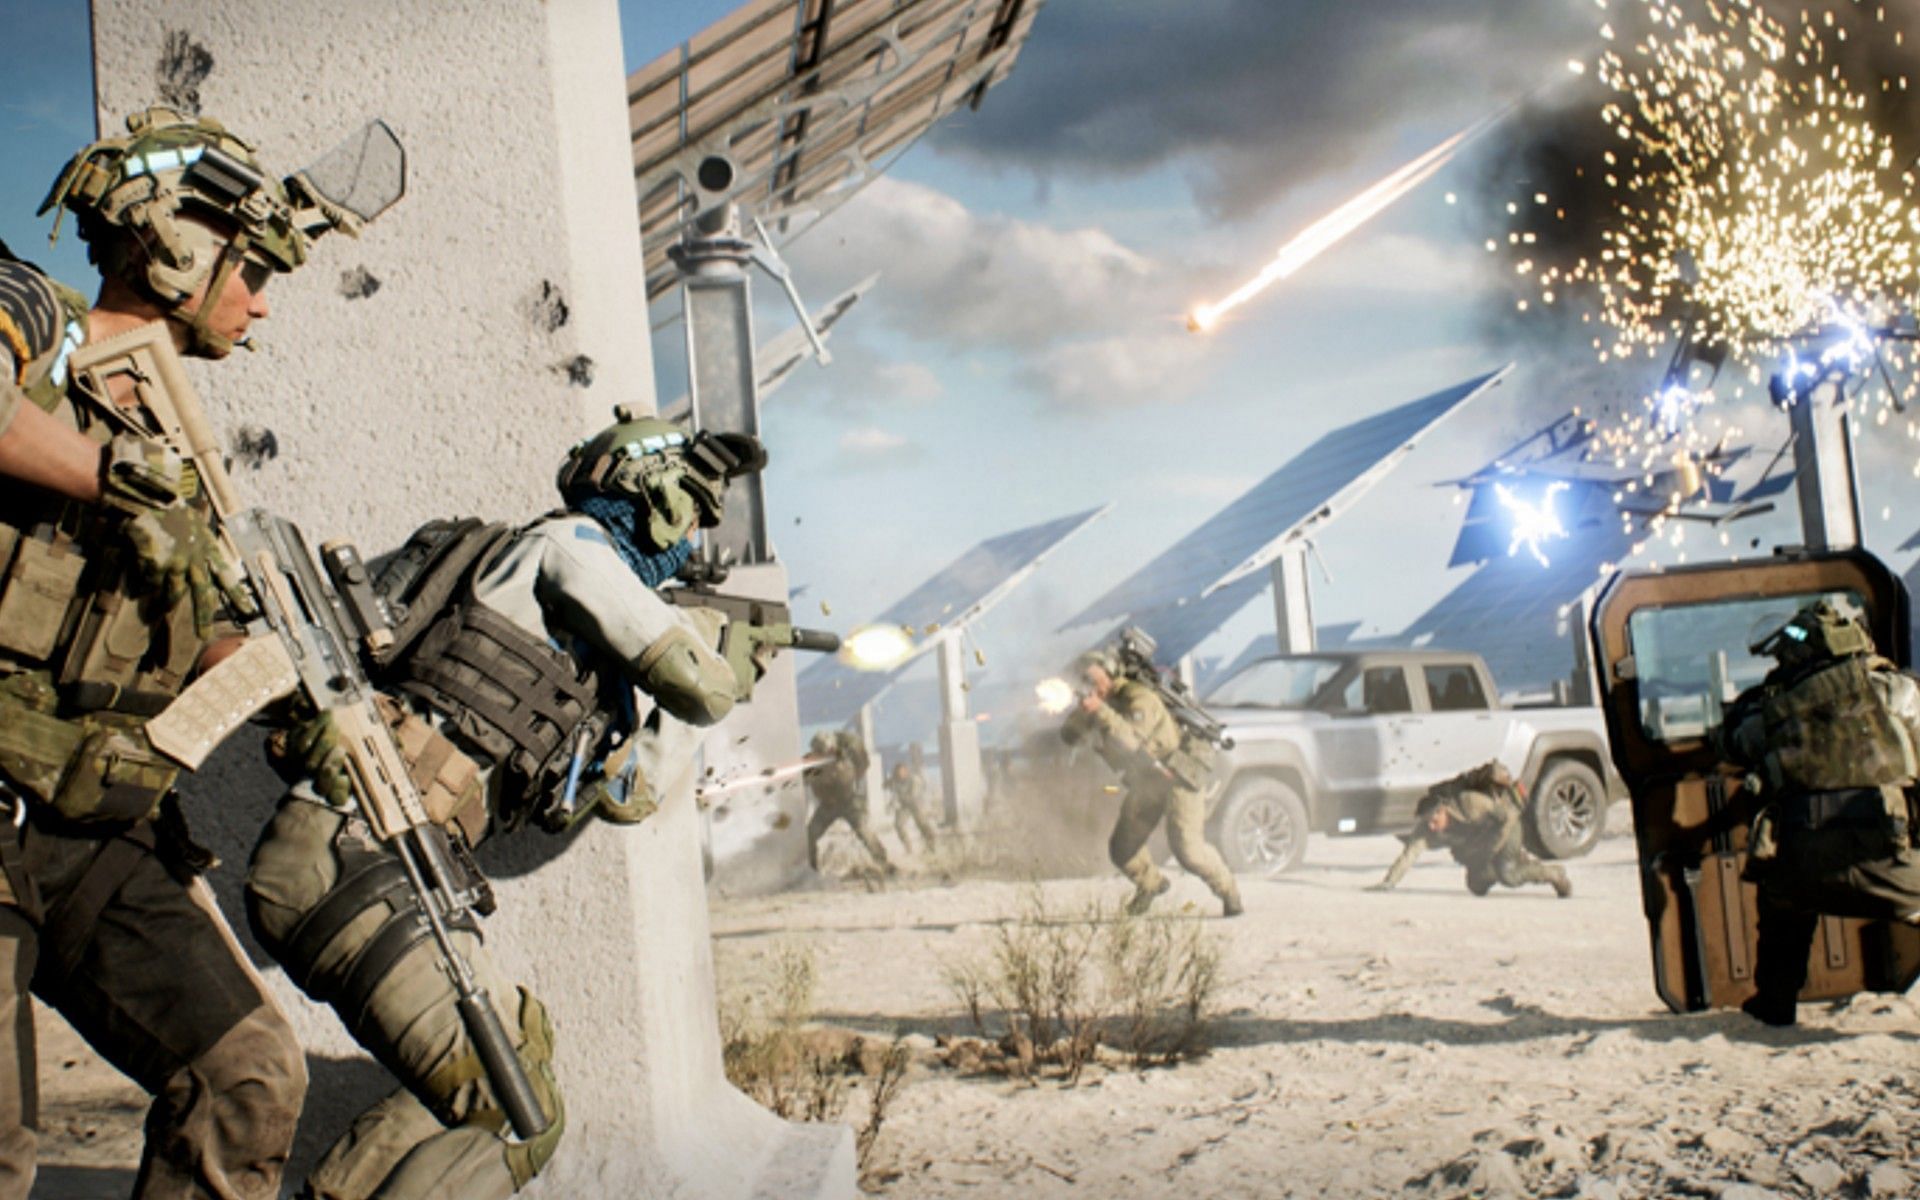 Battlefield 2042 brings the best of the classic and the new (Image via Electronic Arts)